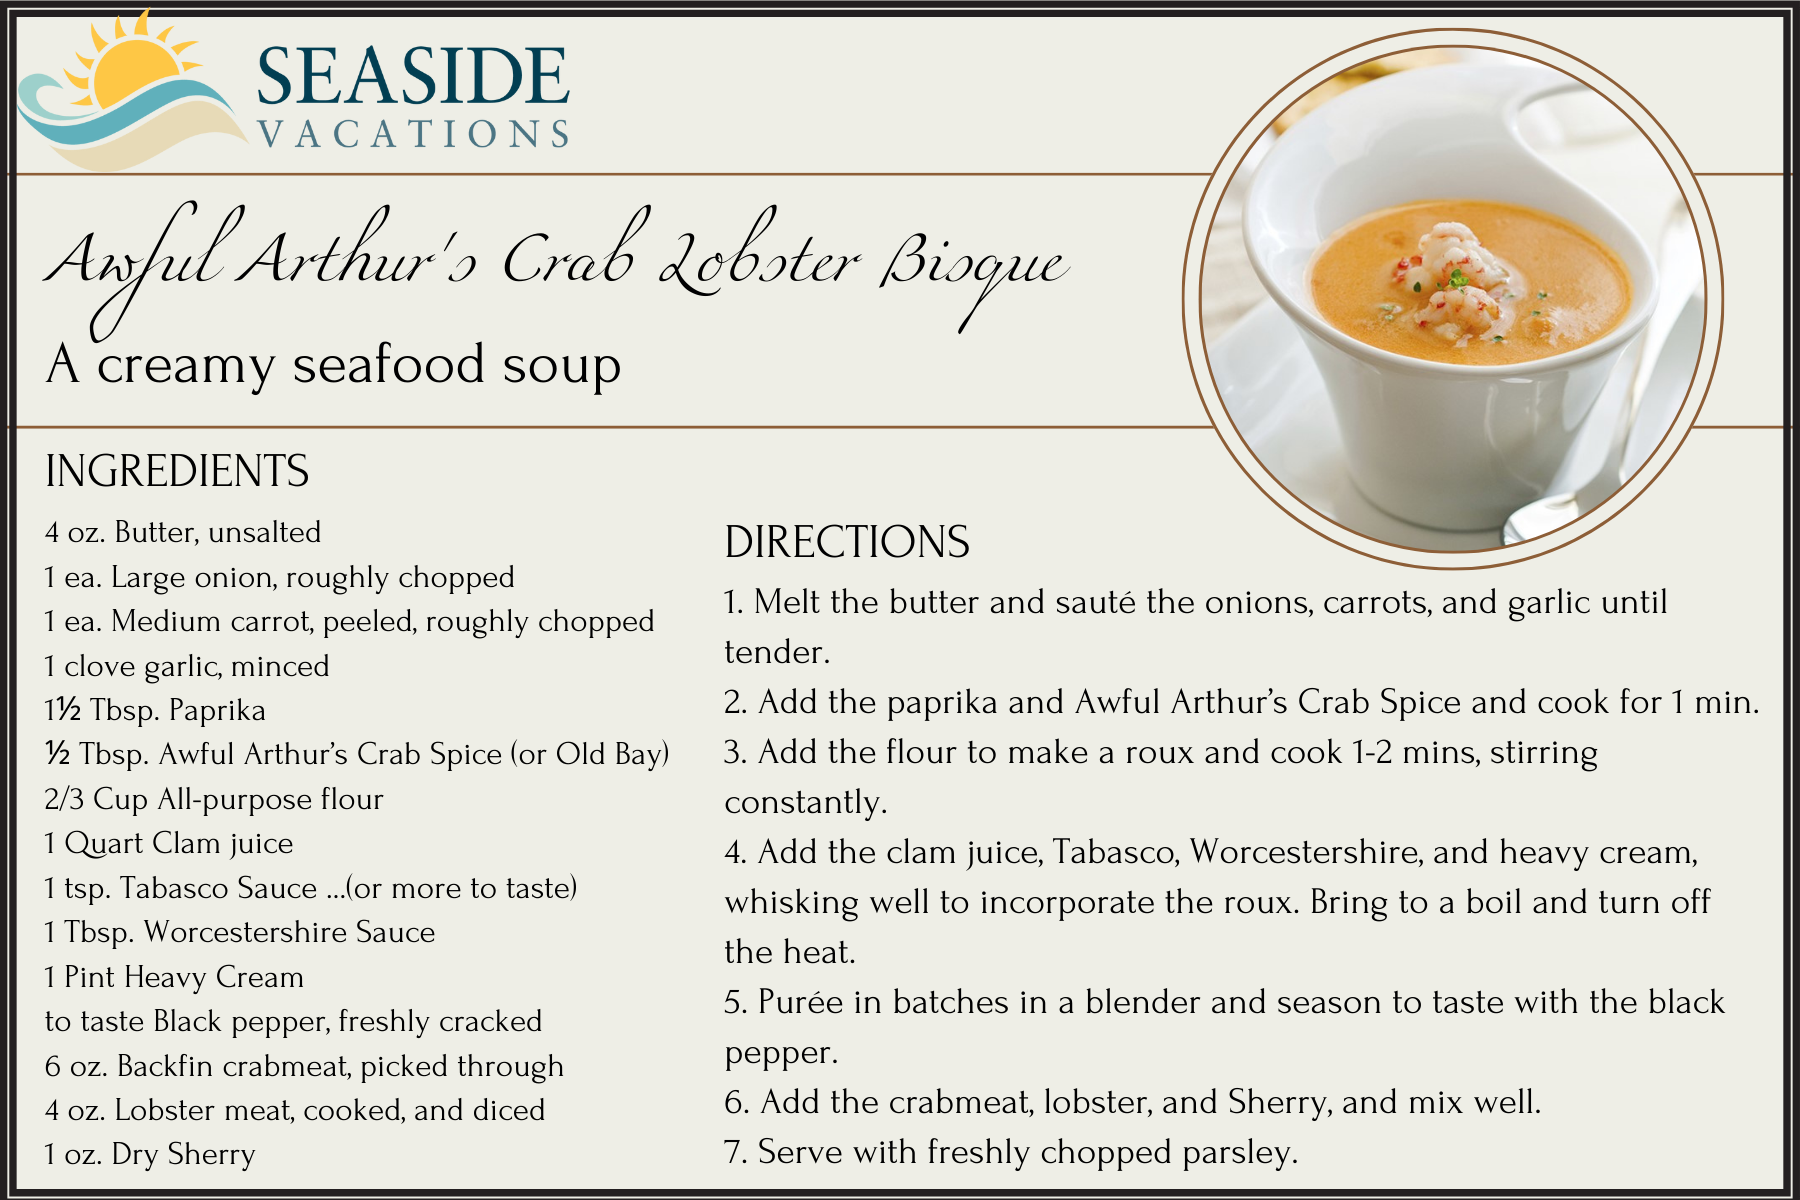 Awful Arthur's Crab Lobster Bisque Recipe Card